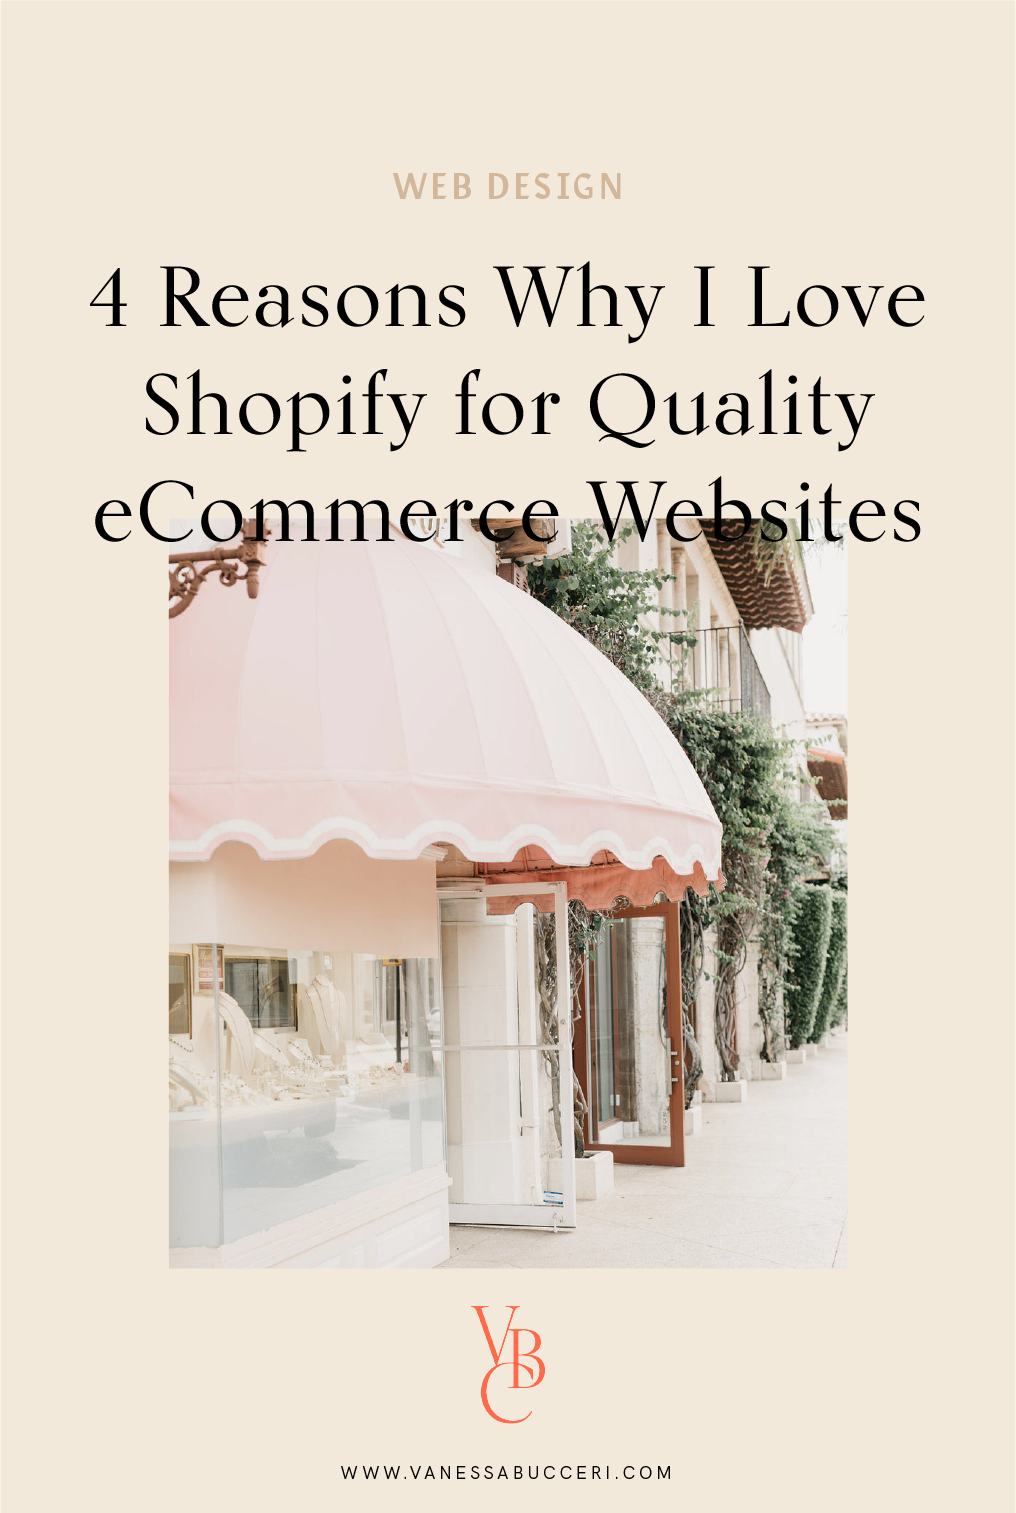 Why I love Shopify for quality eCommerce websites